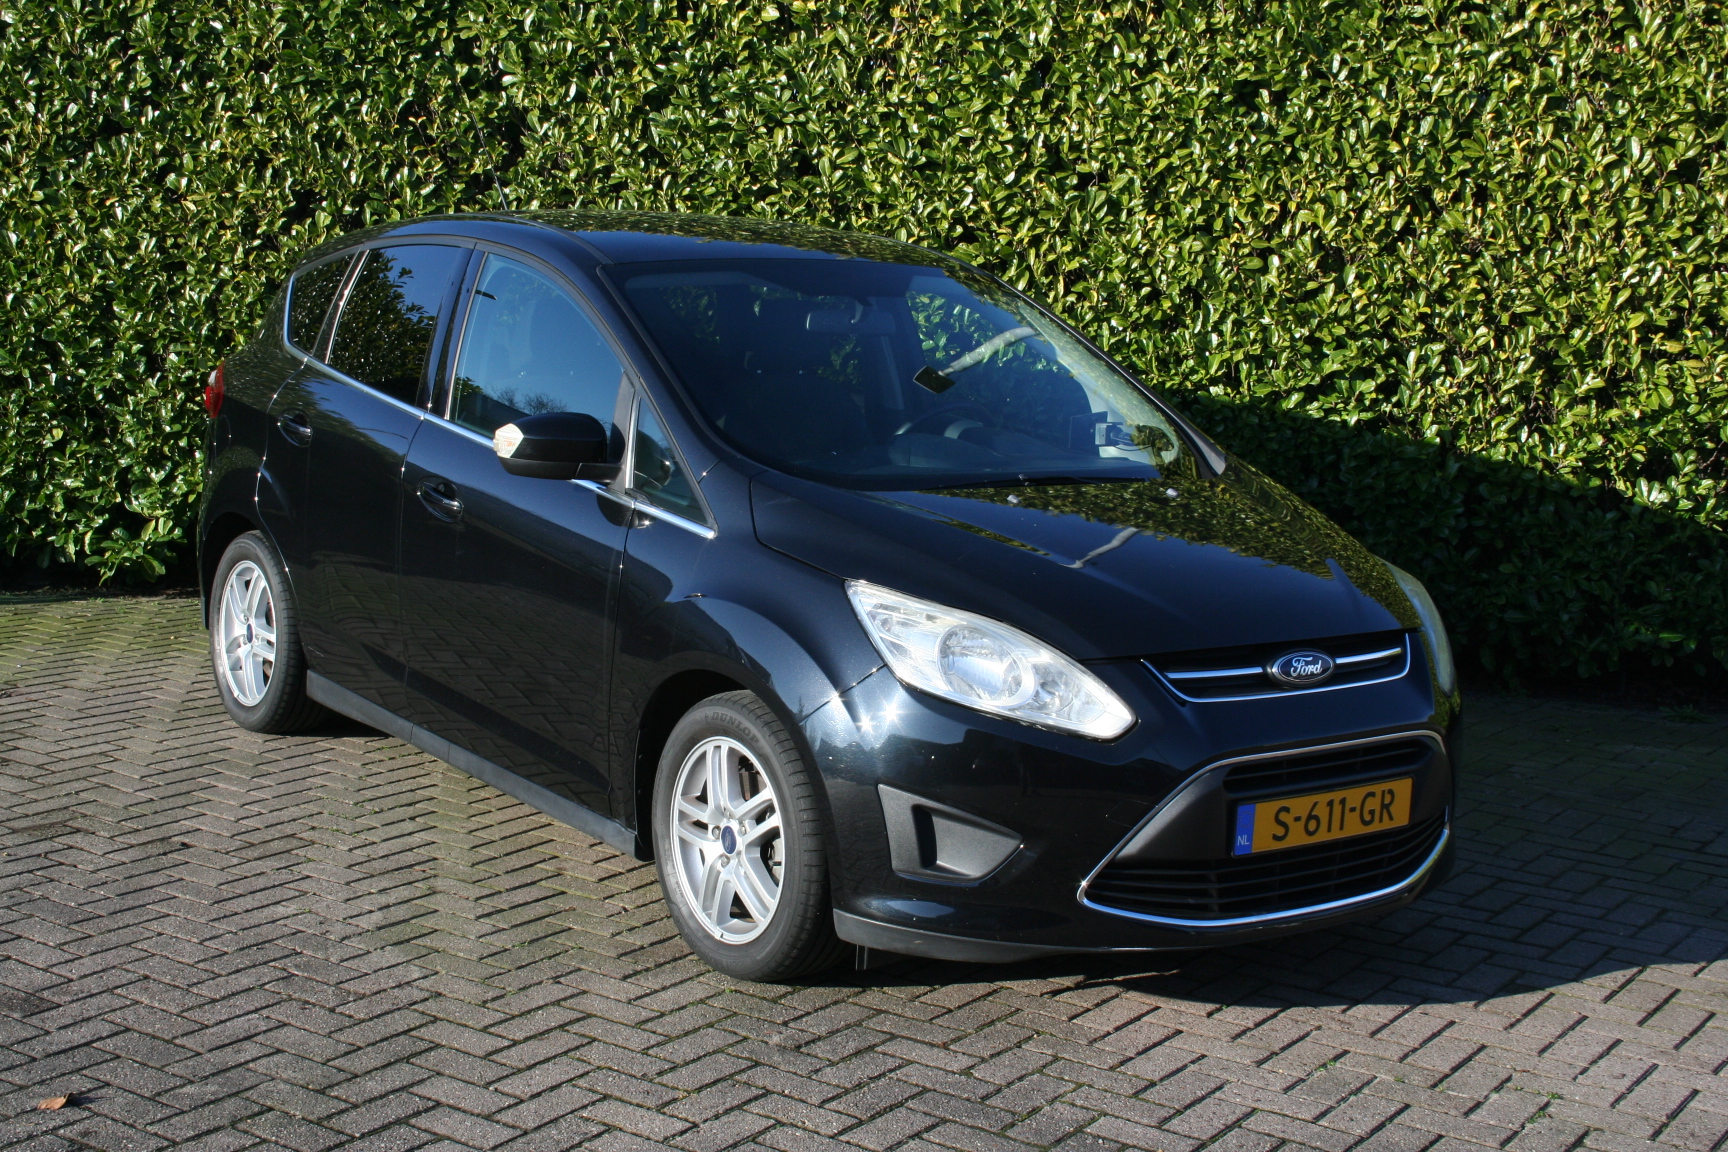 FORD C-Max 1.6 TI-VCT 105pk Econetic Lease Trend bij viaBOVAG.nl